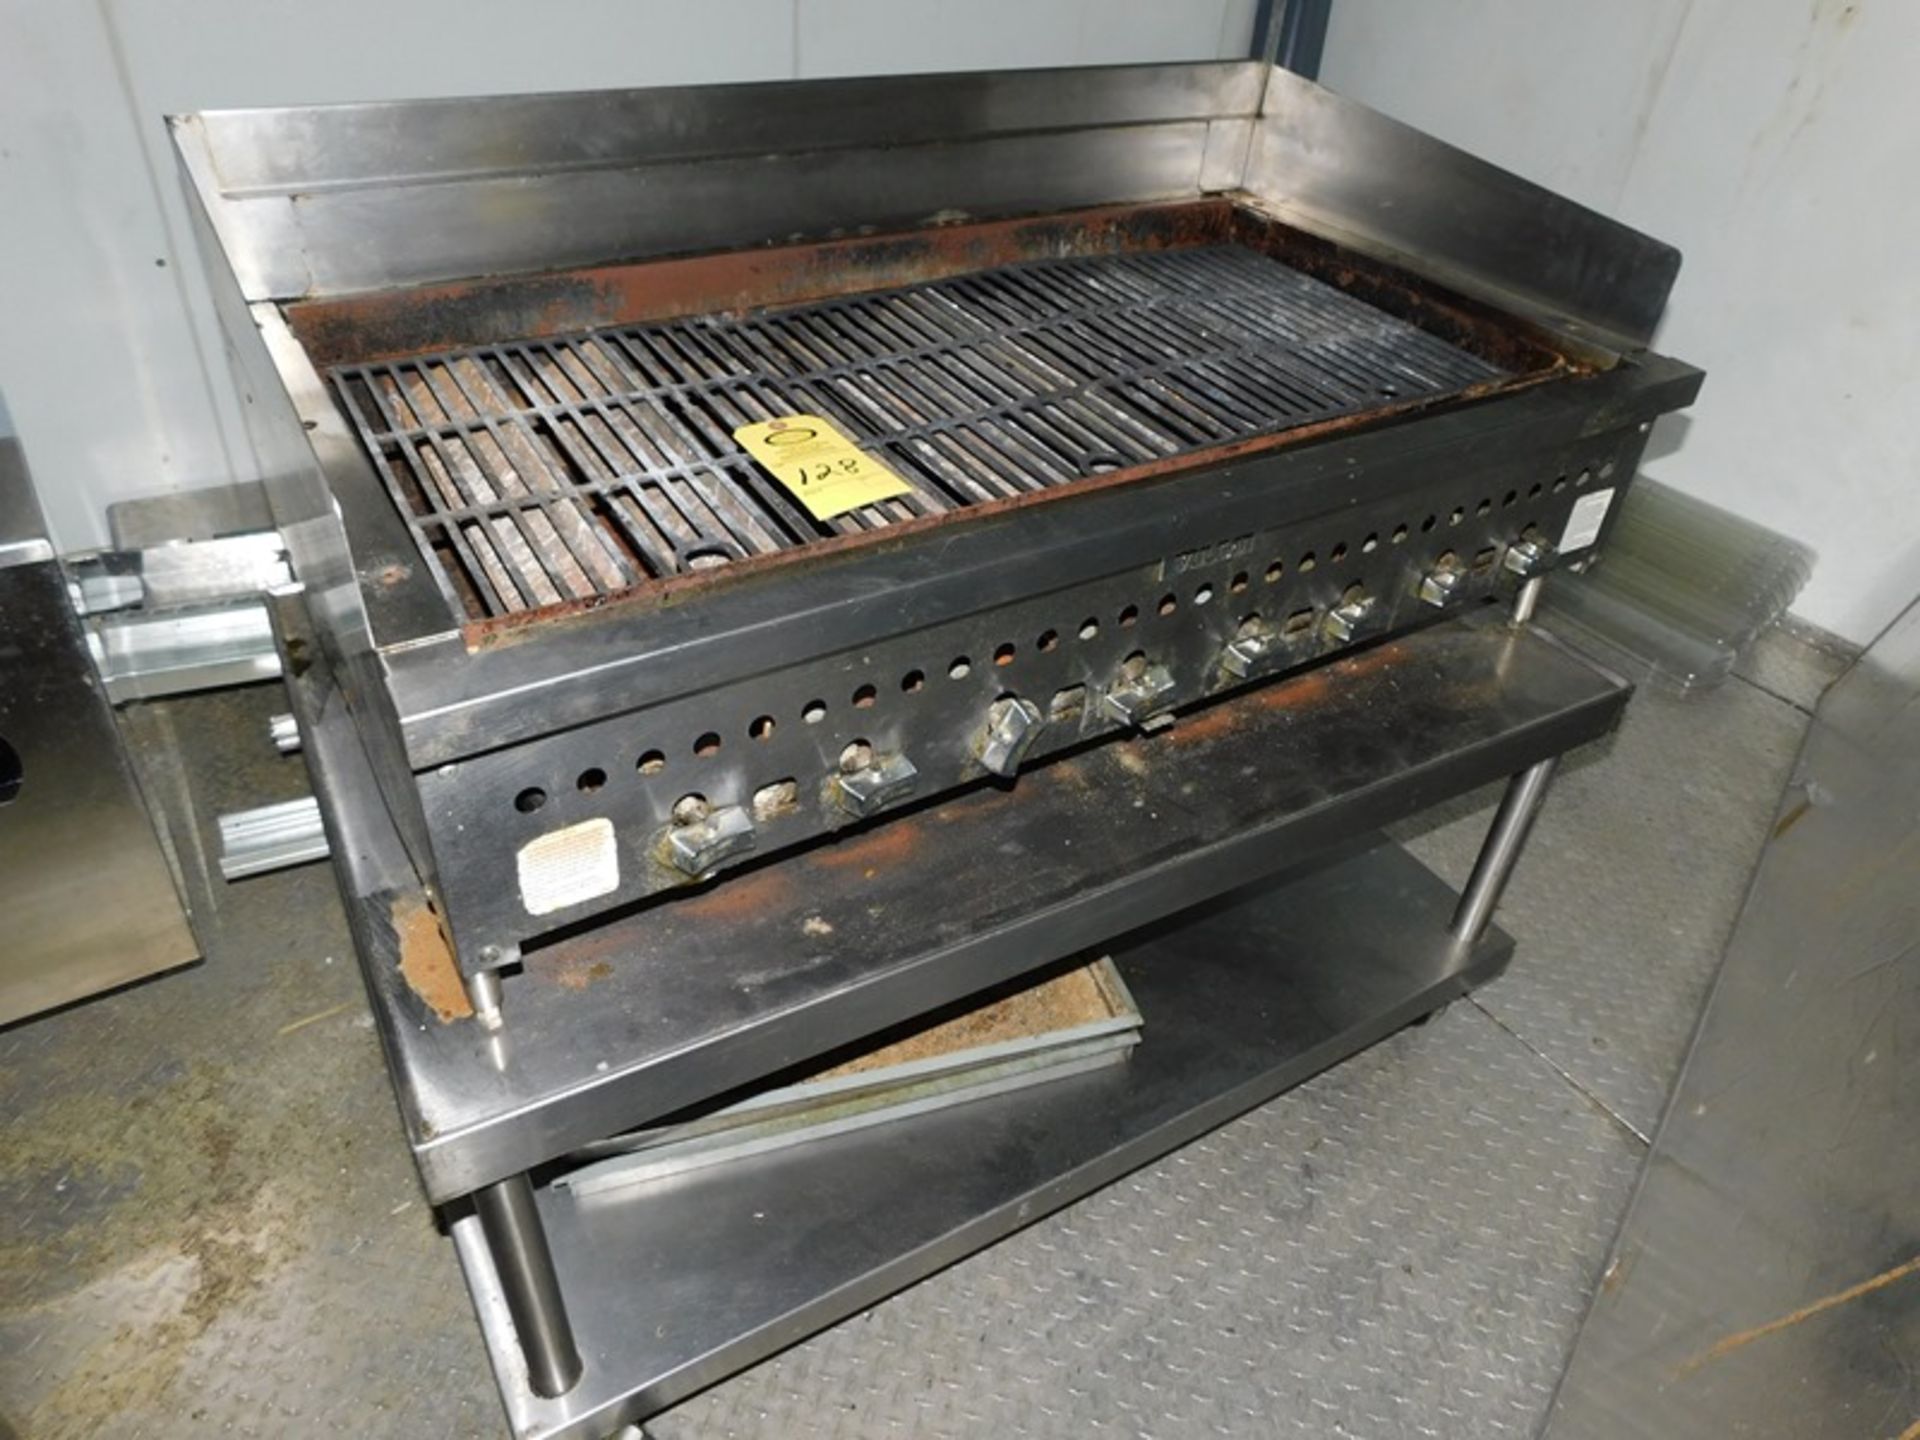 Vulcan Mdl. VCCB47 Grill, Ser. #650124787, 8-burner, 42" X 20", natural gas with portable cart - (